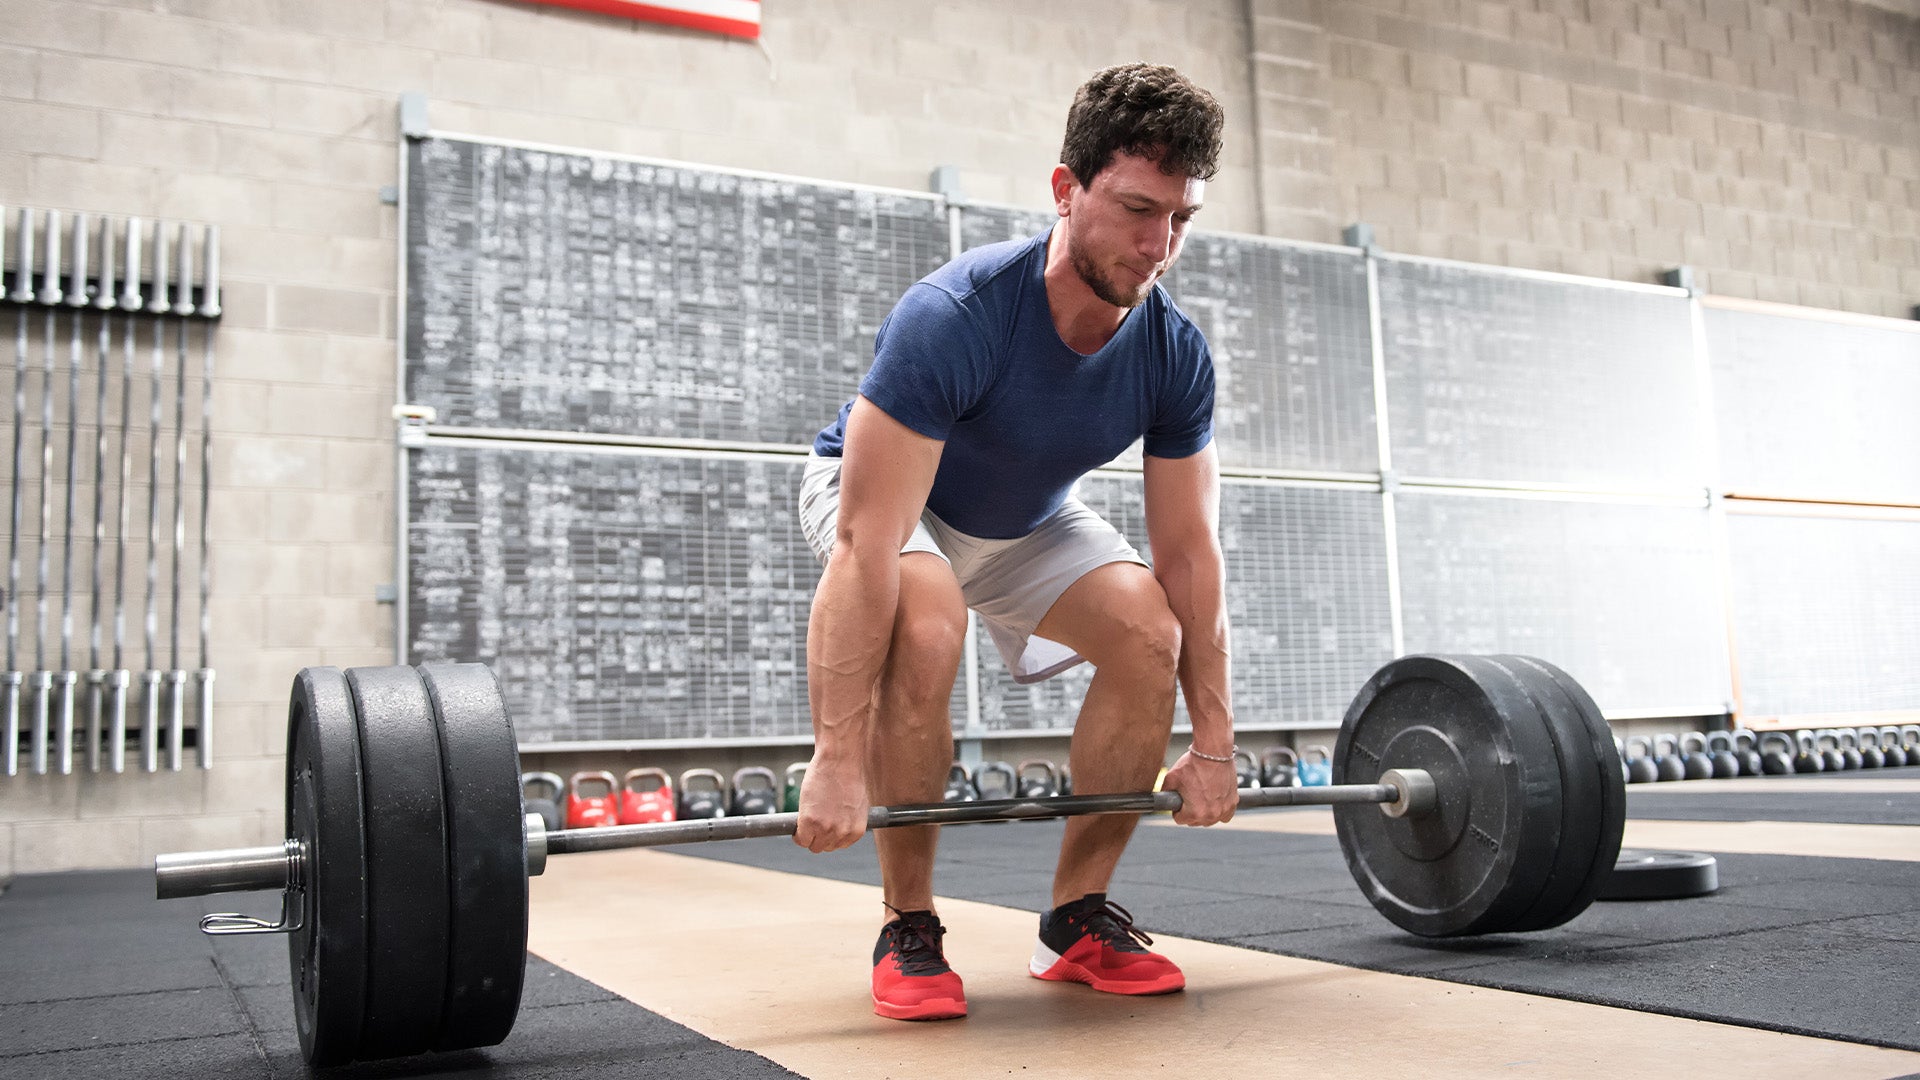 A Safe Guide on How To Deadlift Properly